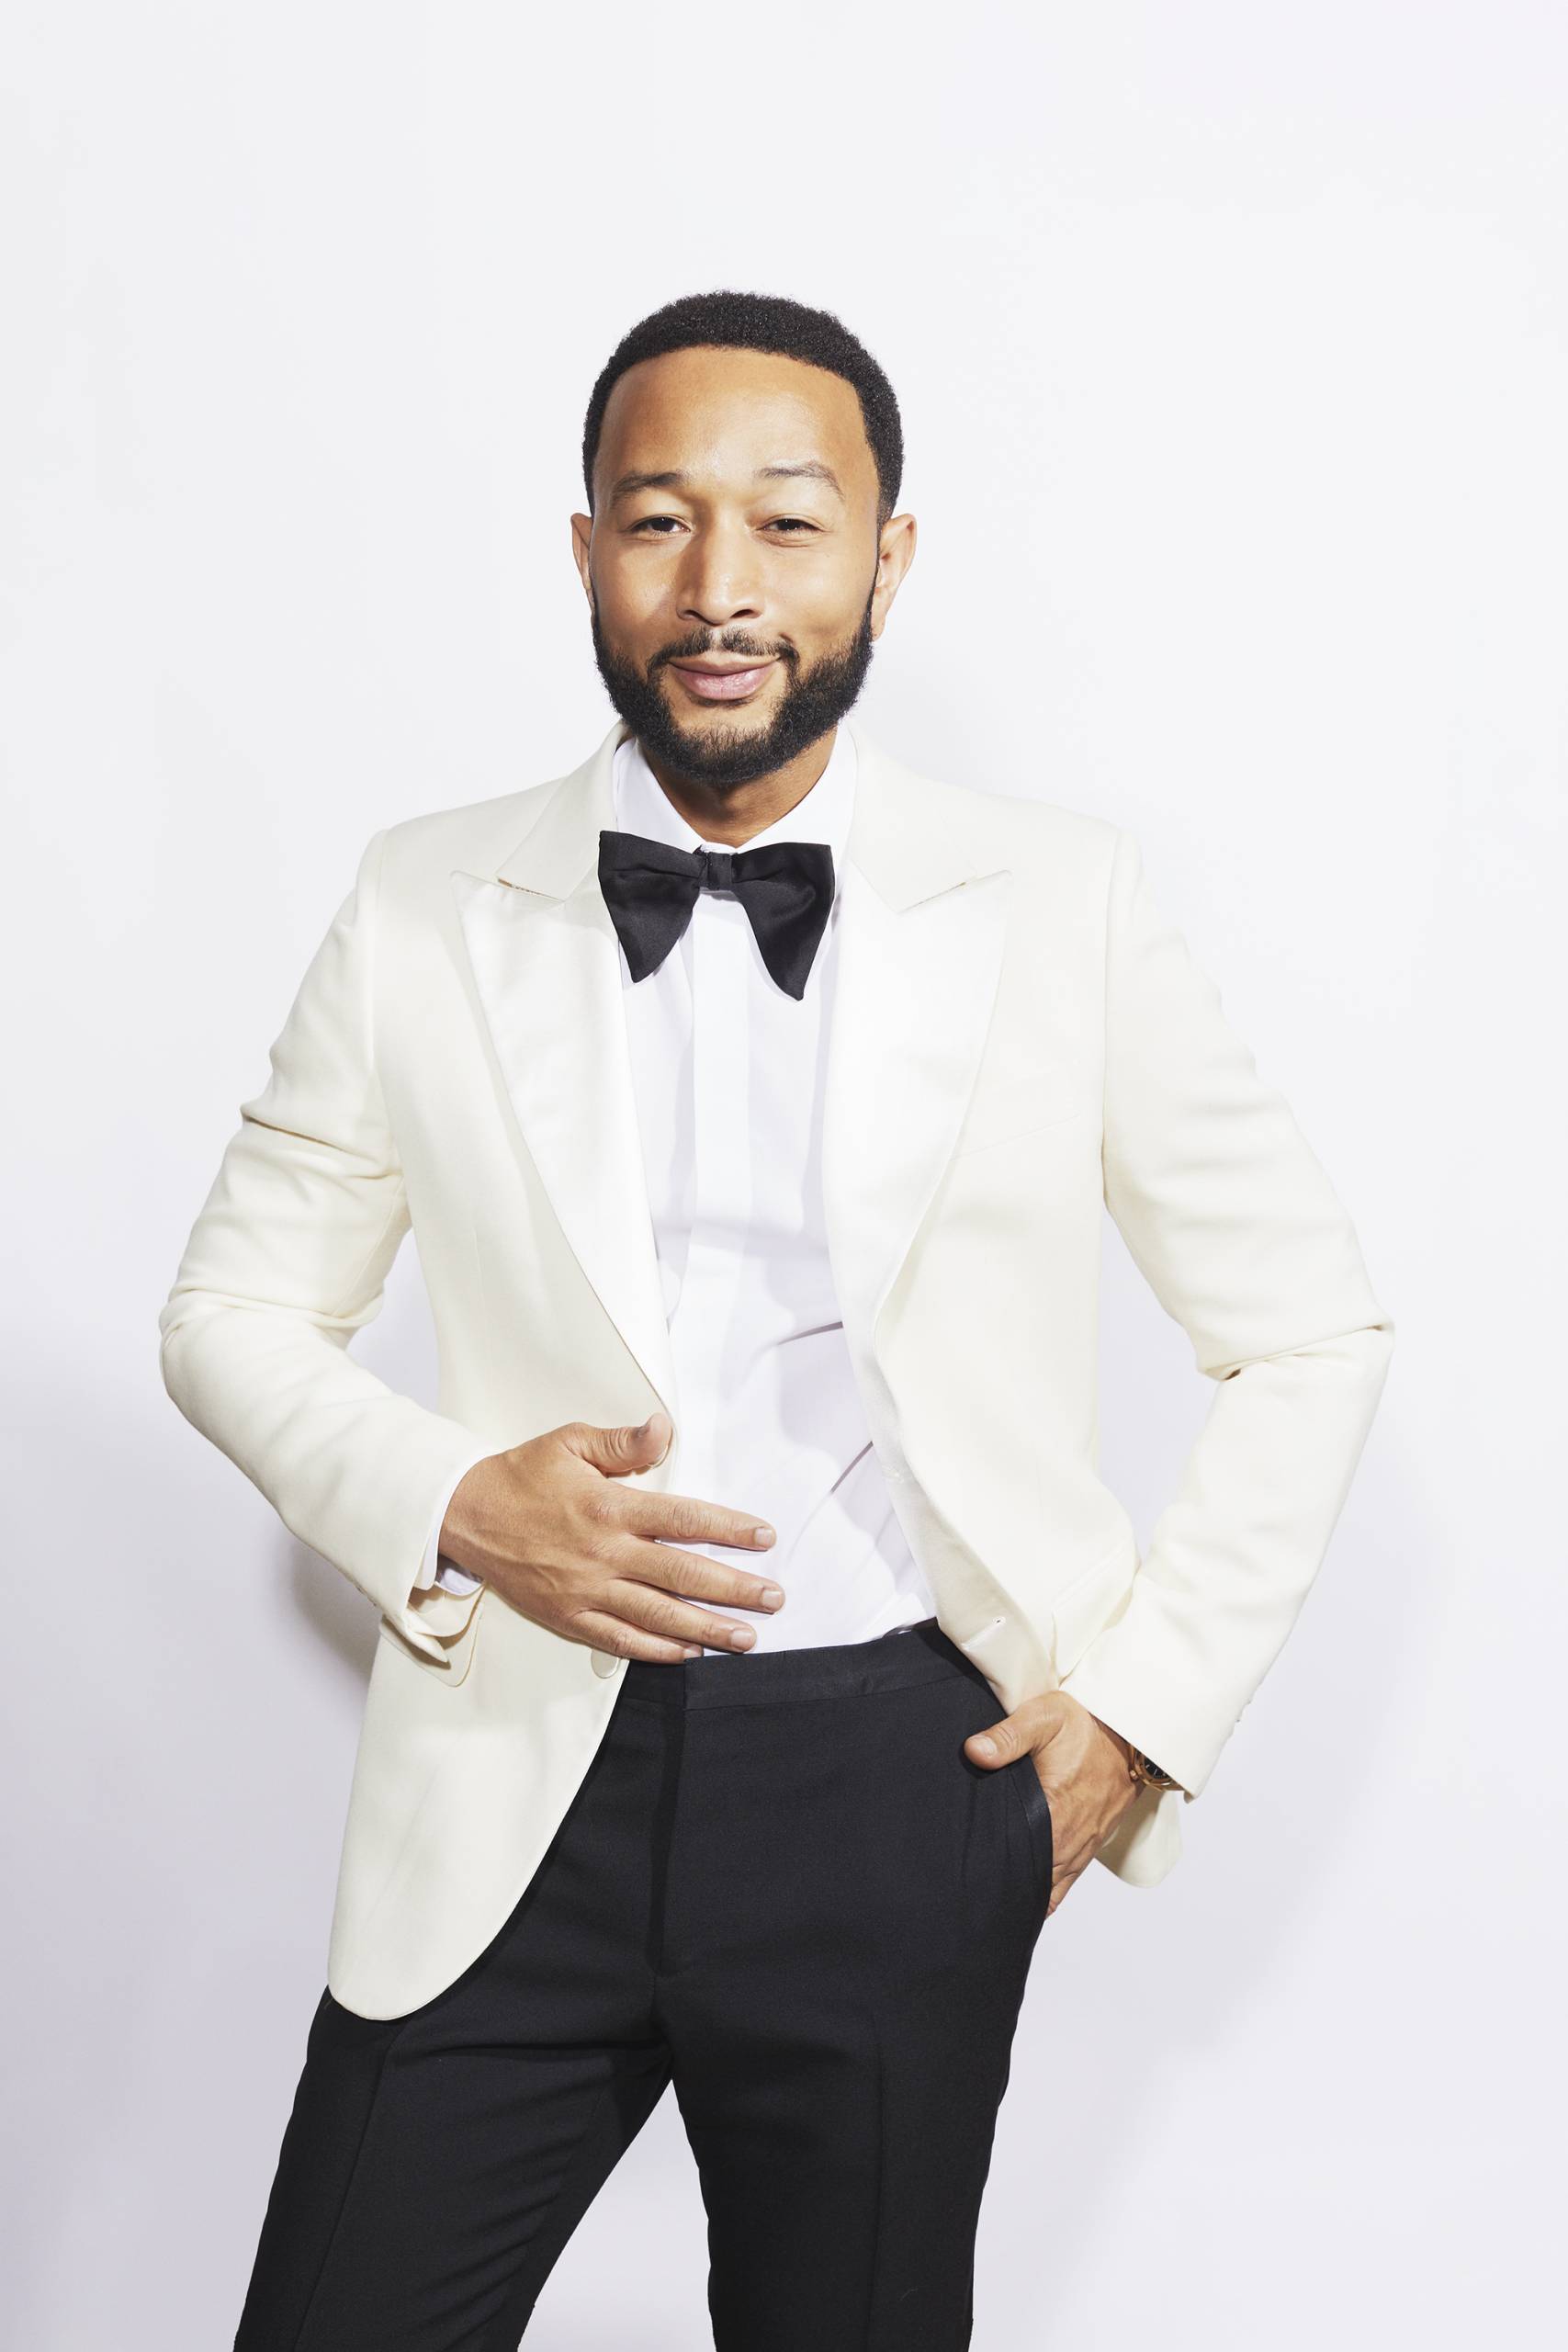 An Evening with John Legend | The Momentary